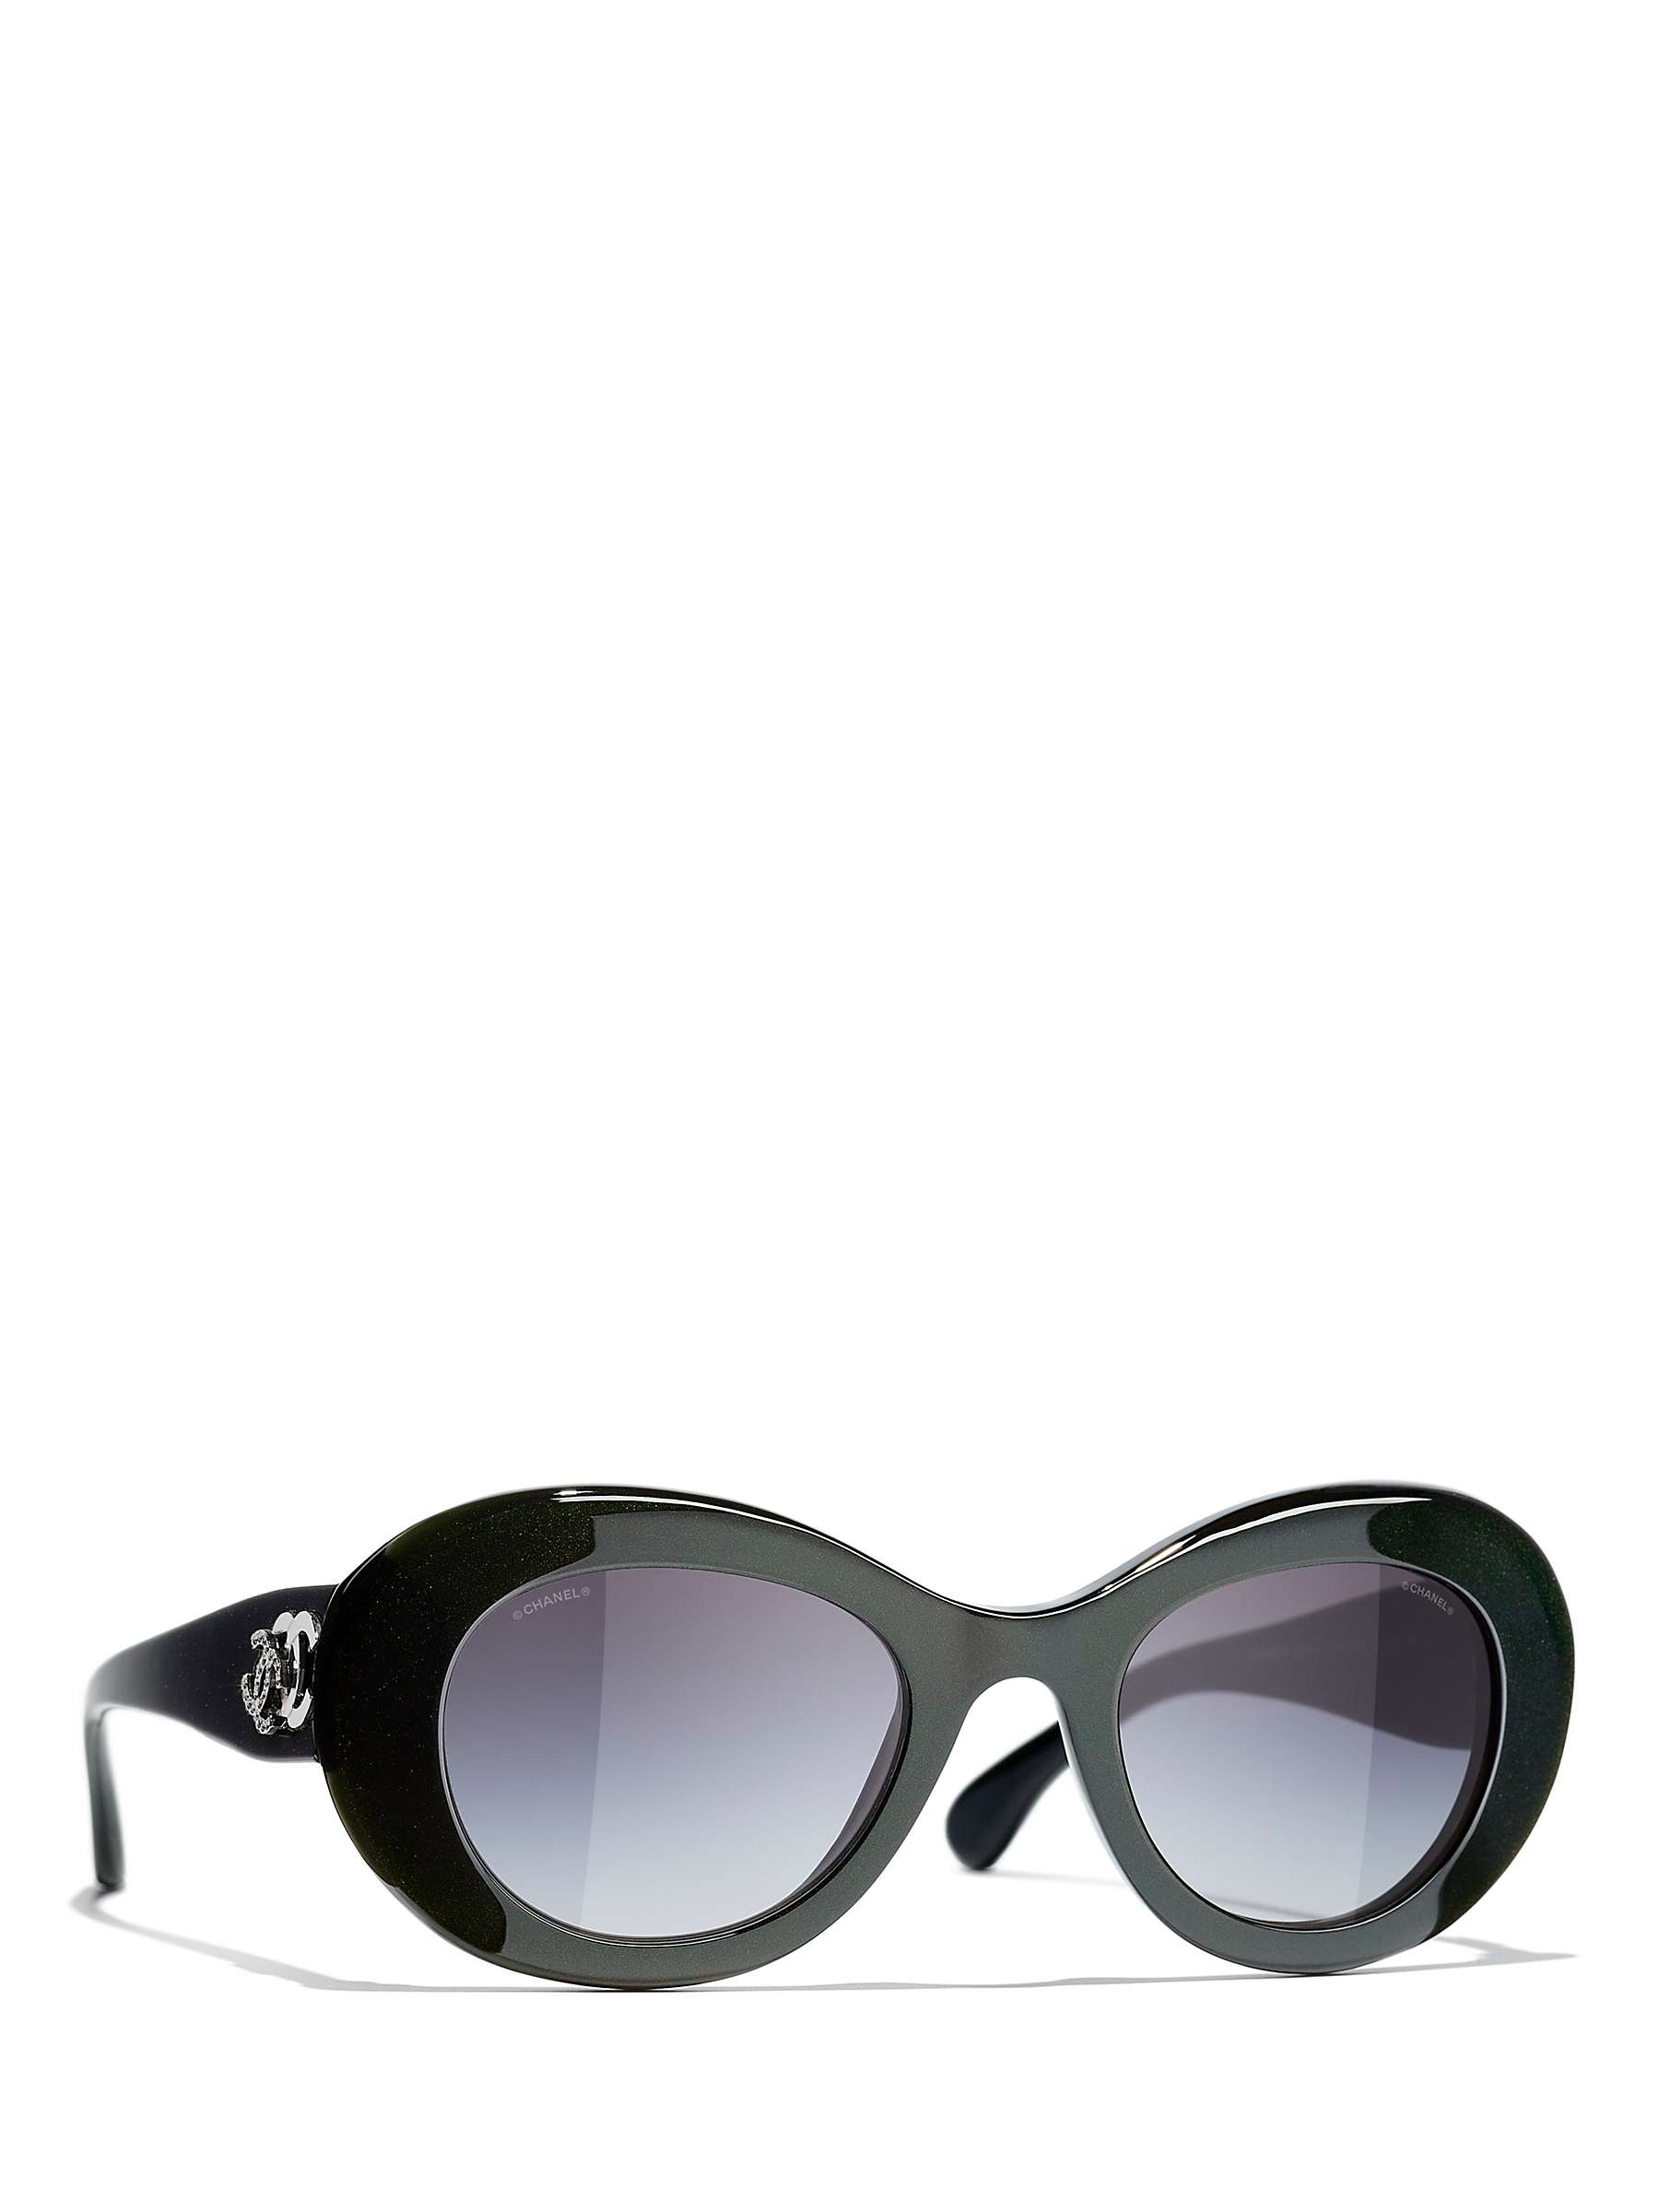 Get the best deals on CHANEL Oval Sunglasses for Women when you